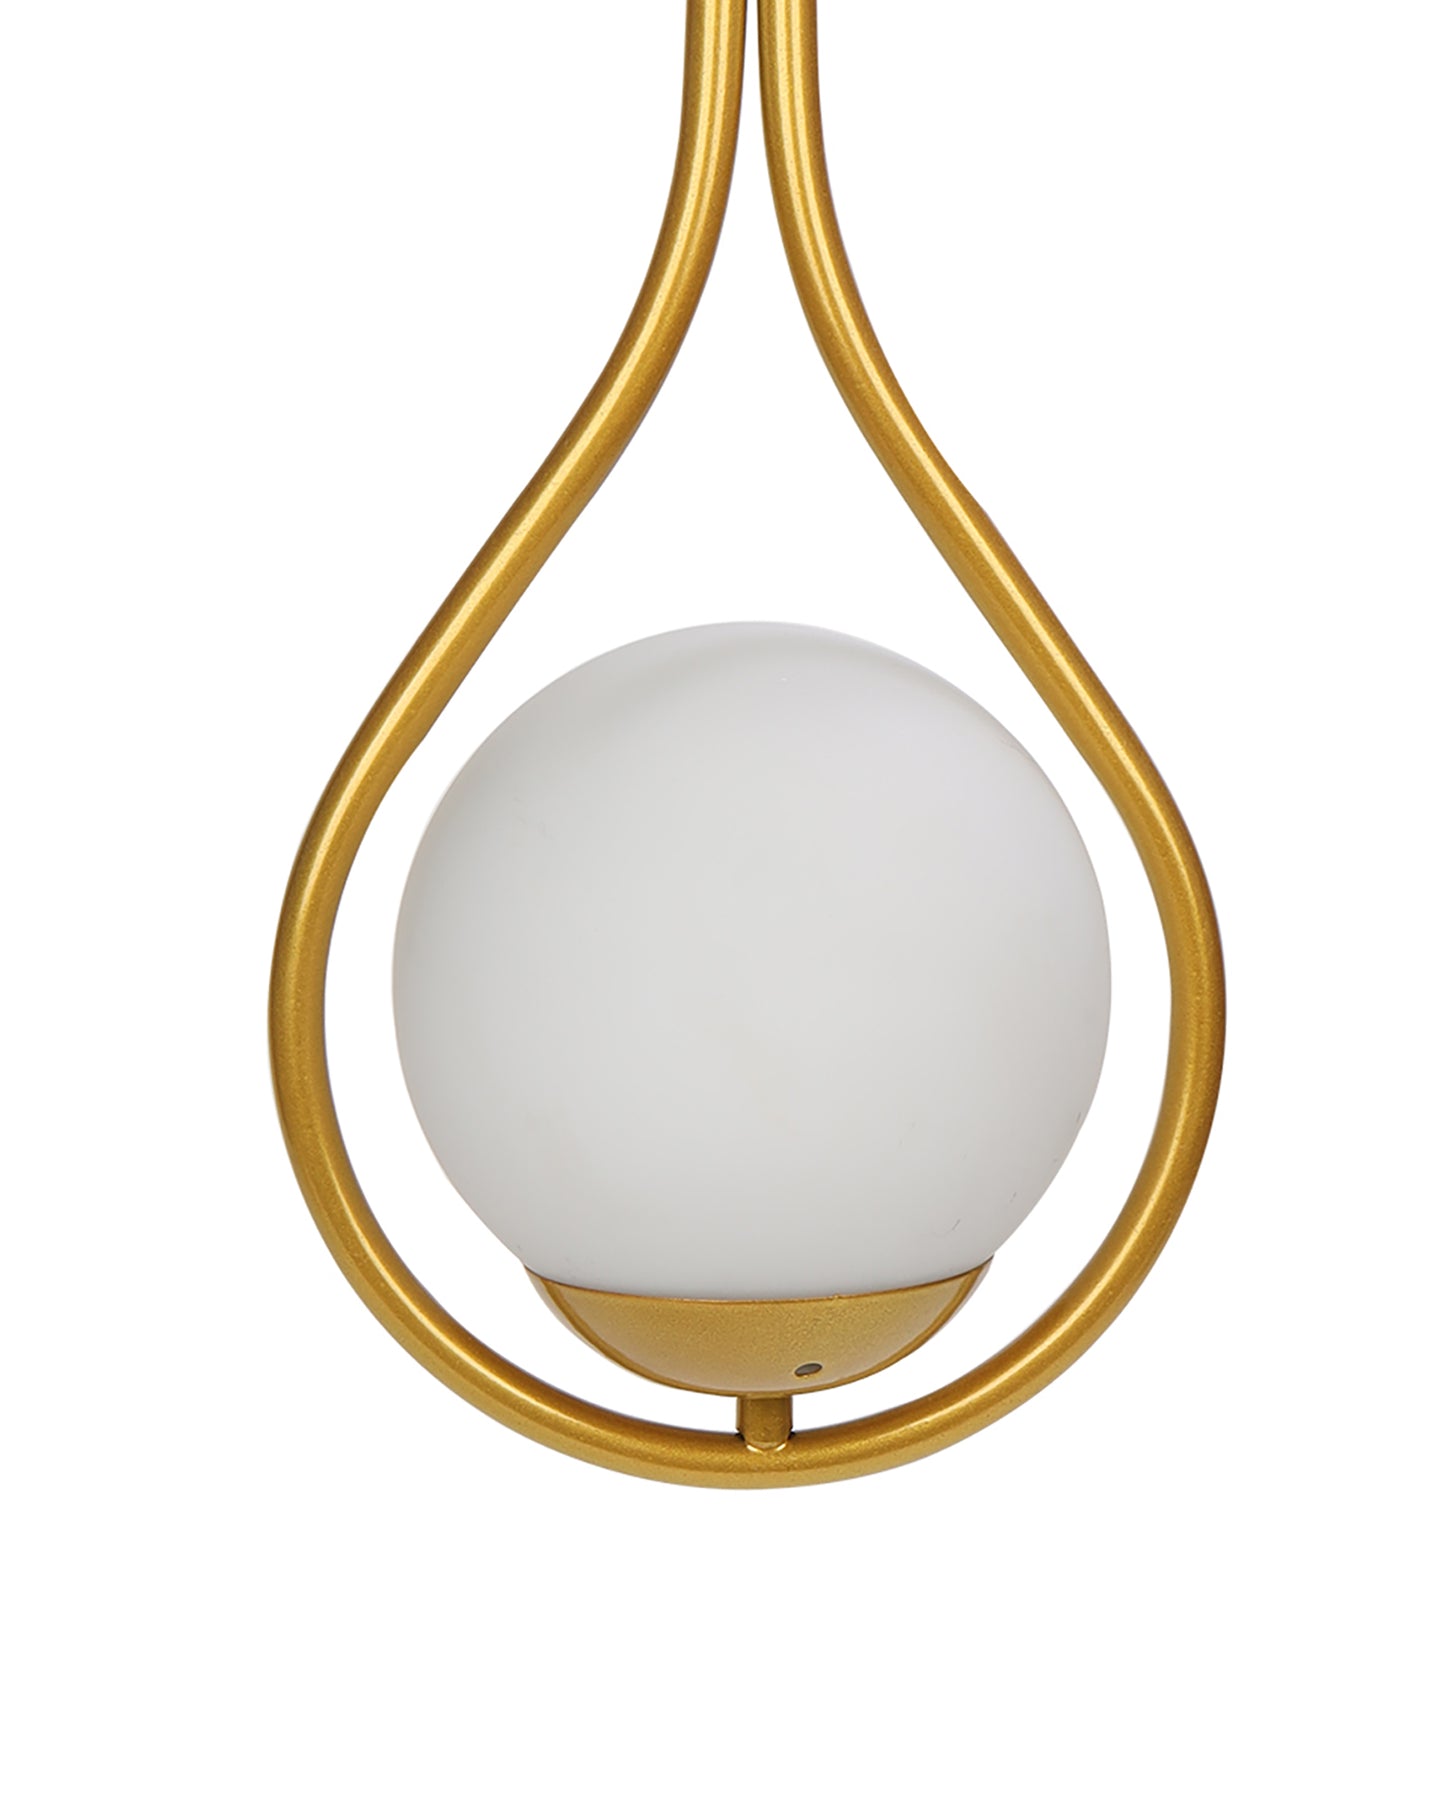 Mid Century Modern Light Chandelier Lighting, White Frosted Glass Globe Lampshade Pendant Indoor Hanging Light Fixture, Rubbed Bronze water drop